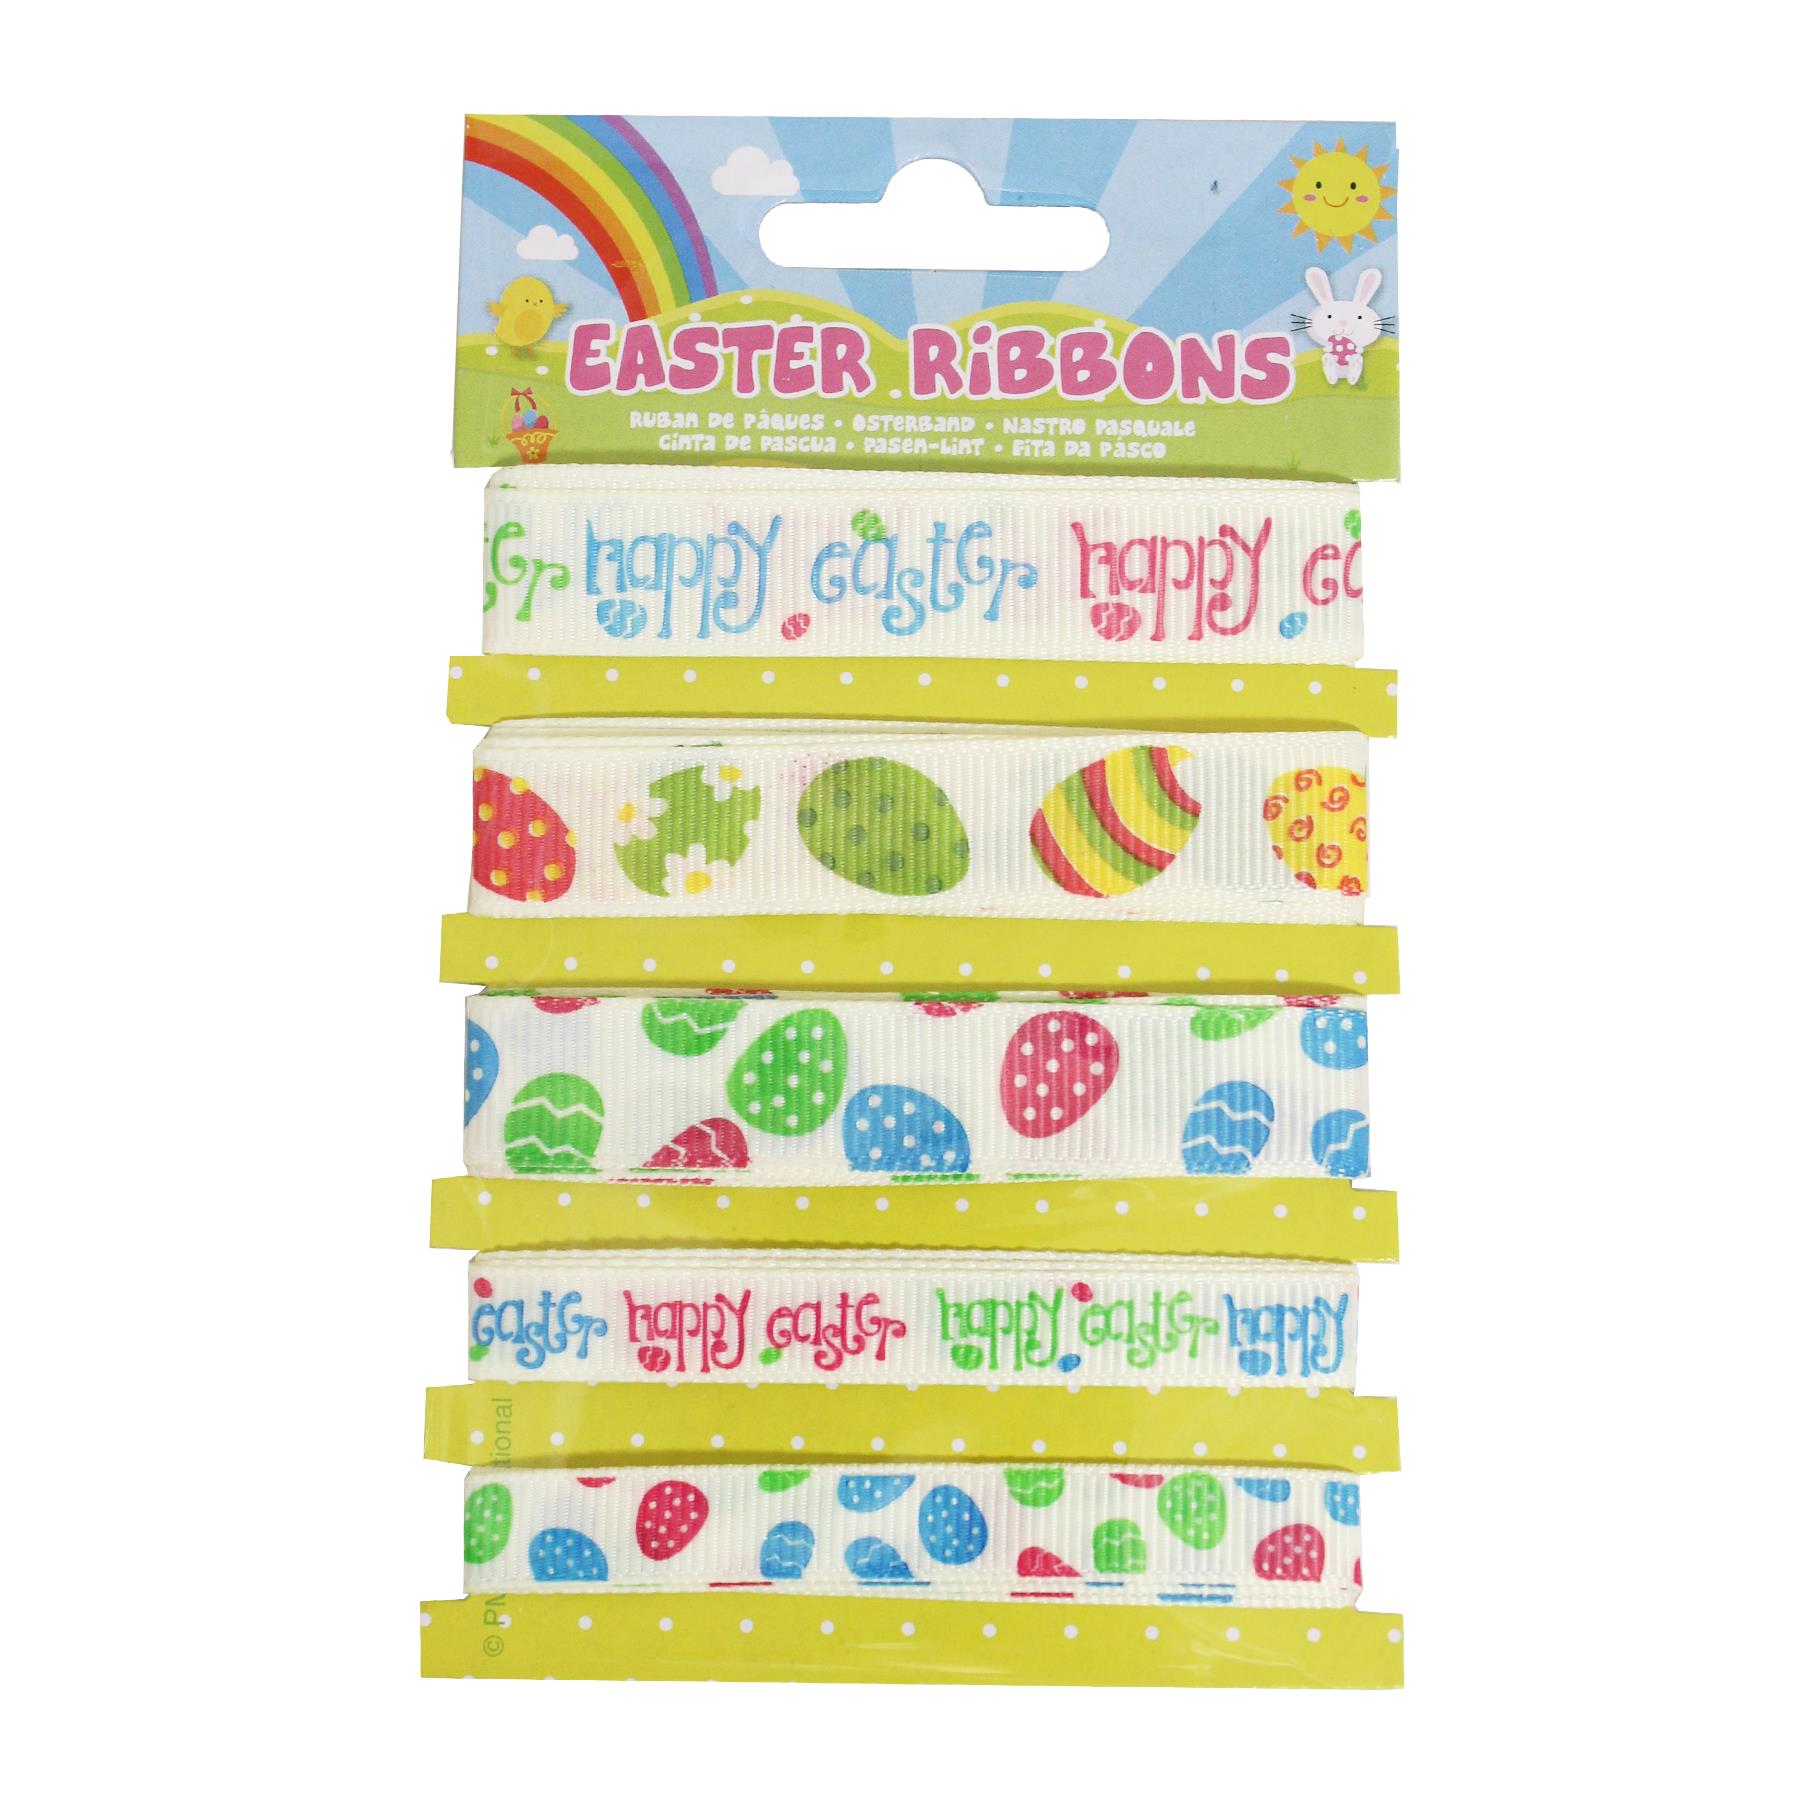 Easter Decorations, Bonnet Making, Arts and Crafts - Assorted Easter Ribbons